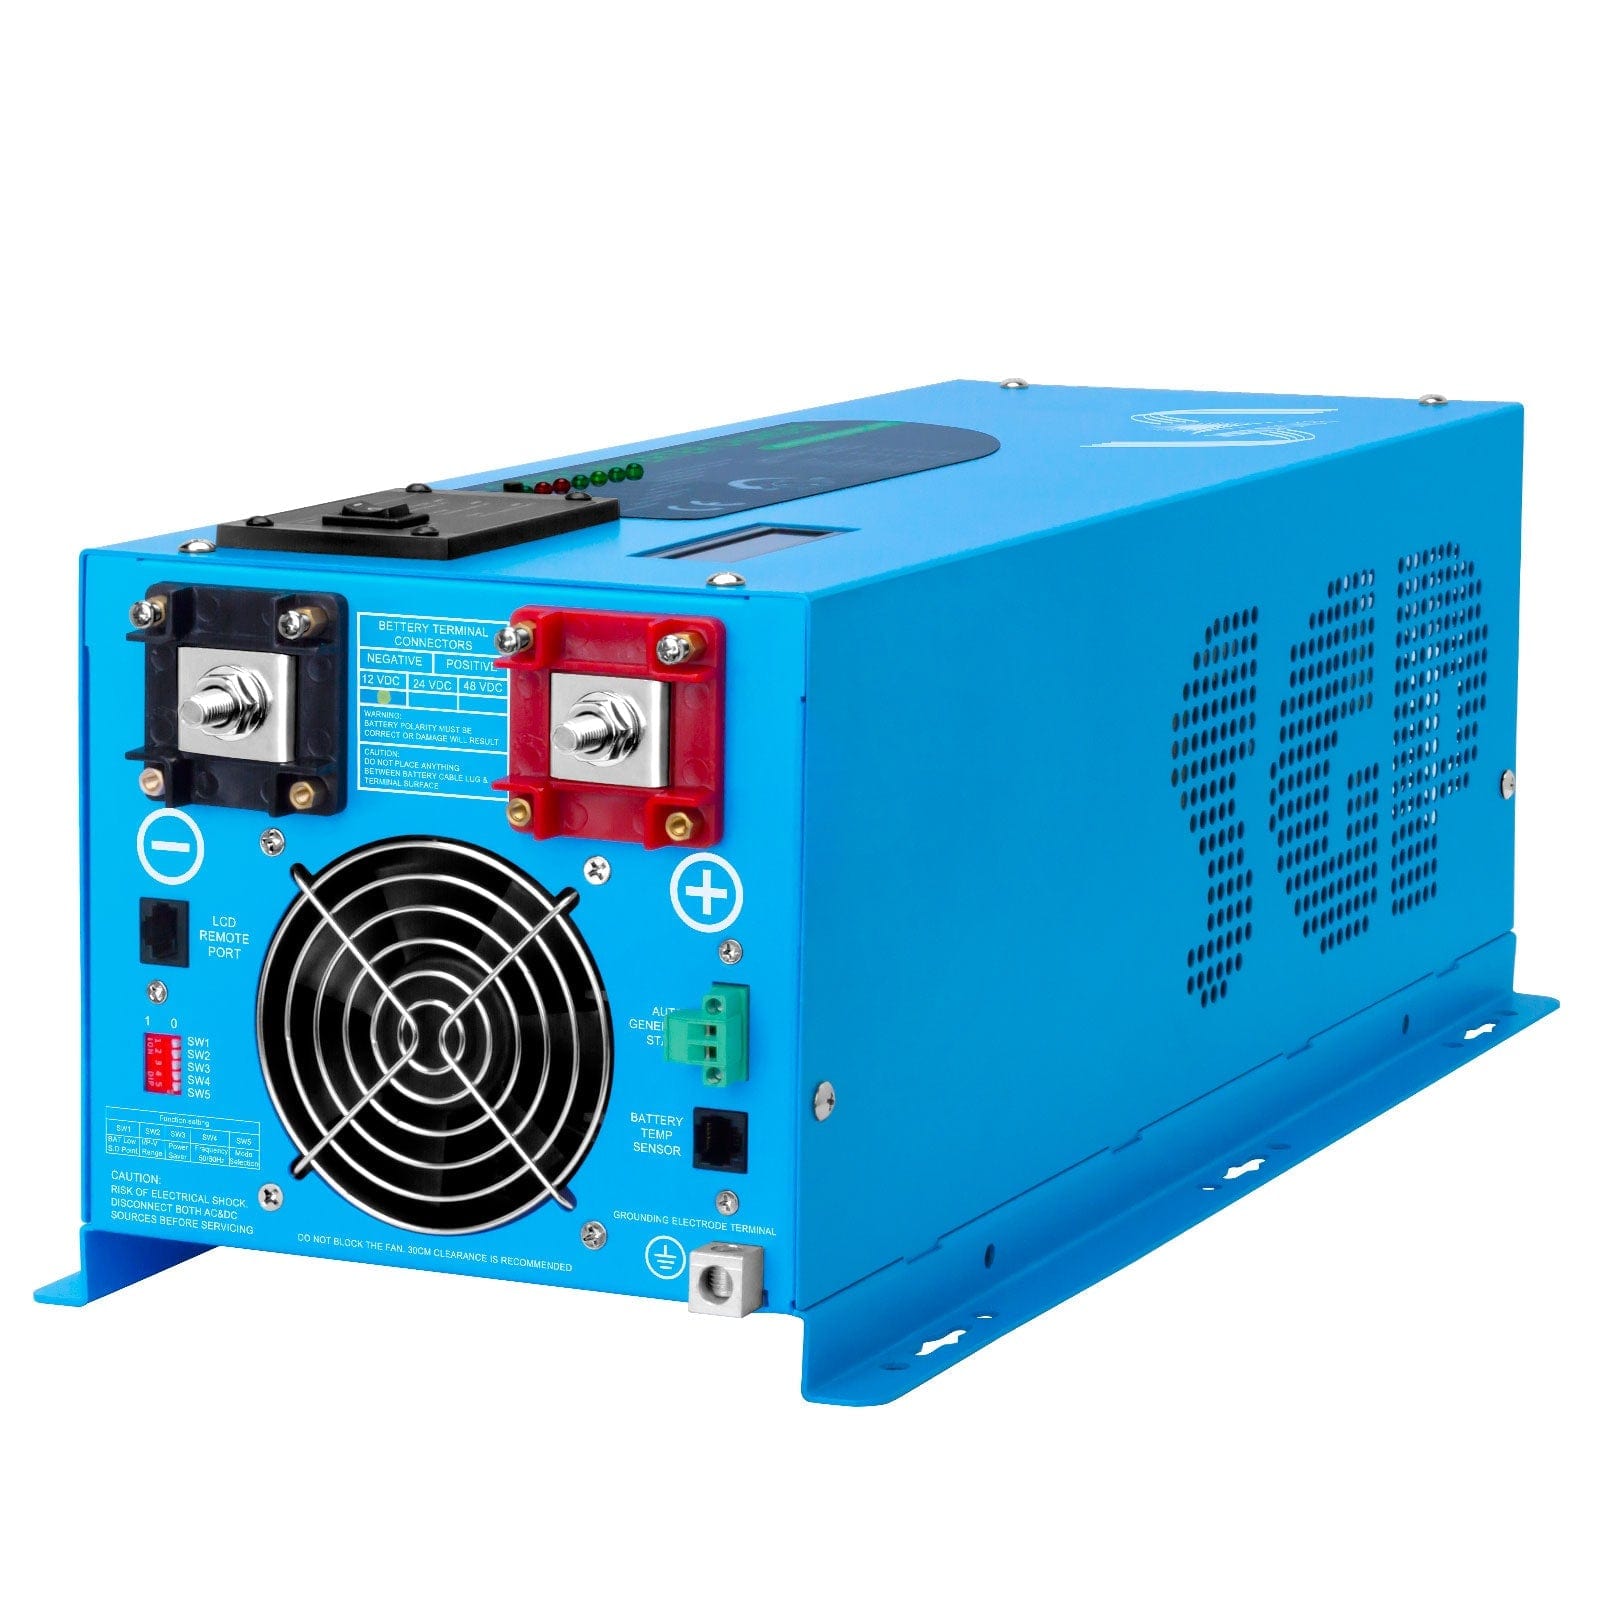 2000W DC 12V Pure Sine Wave Inverter With Charger SunGoldPower 120V / 120V Pure Sine Wave Inverter With Charger